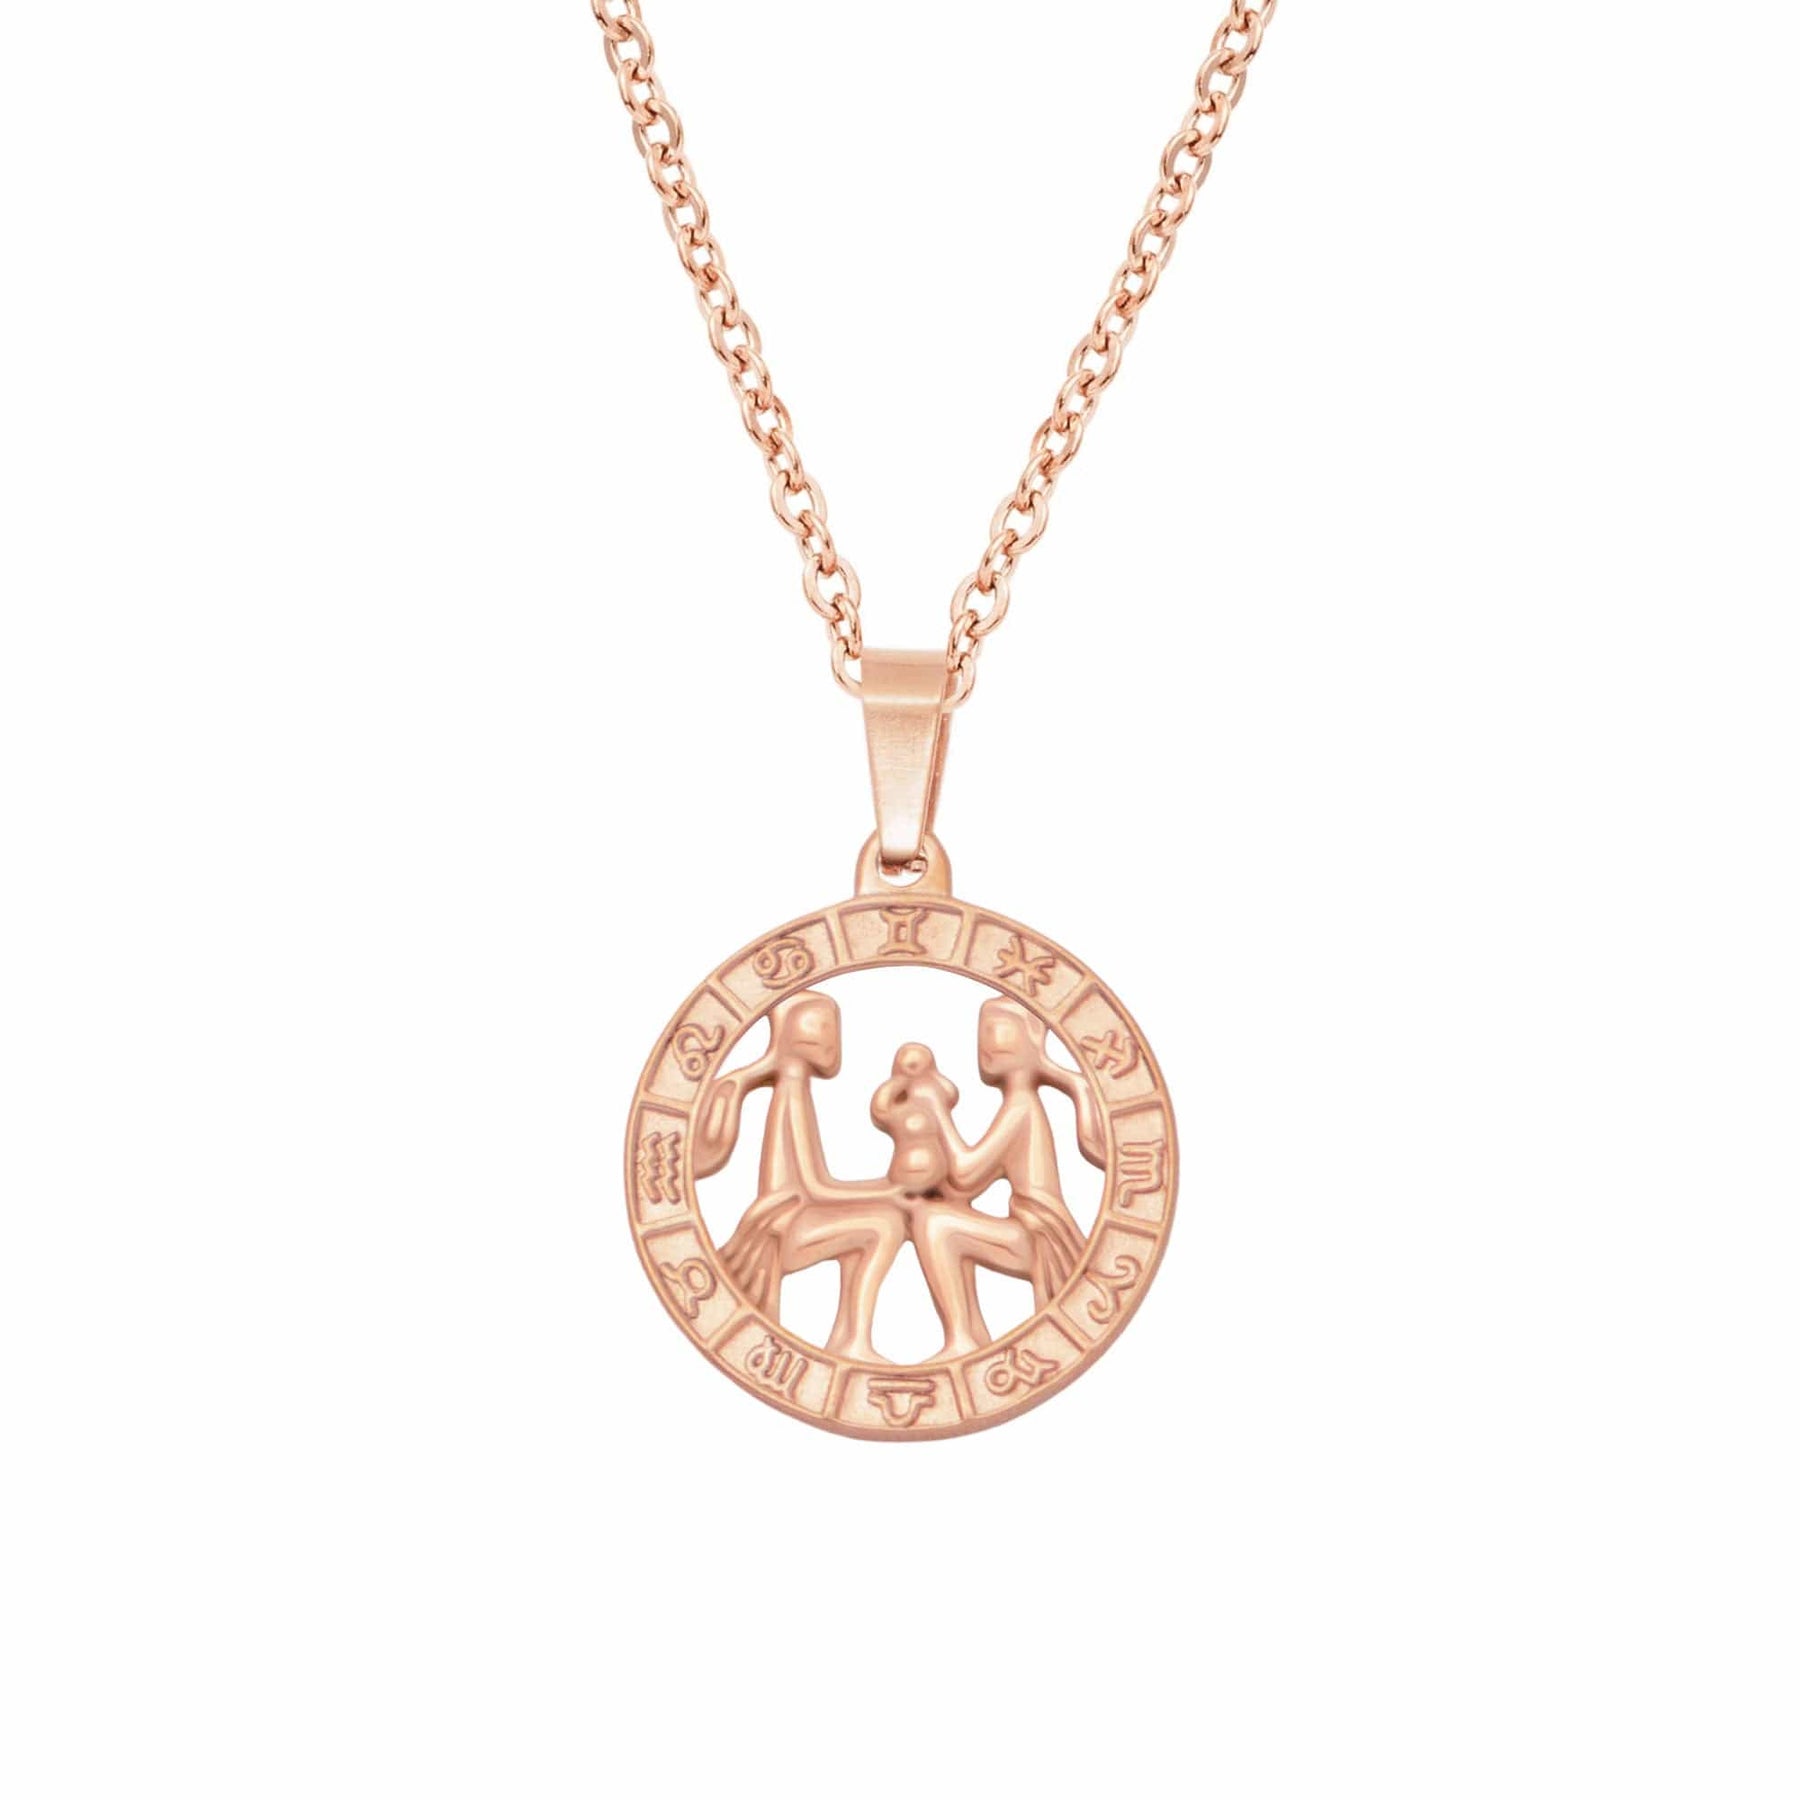 BohoMoon Stainless Steel Classic Zodiac Necklace Rose Gold / Gemini